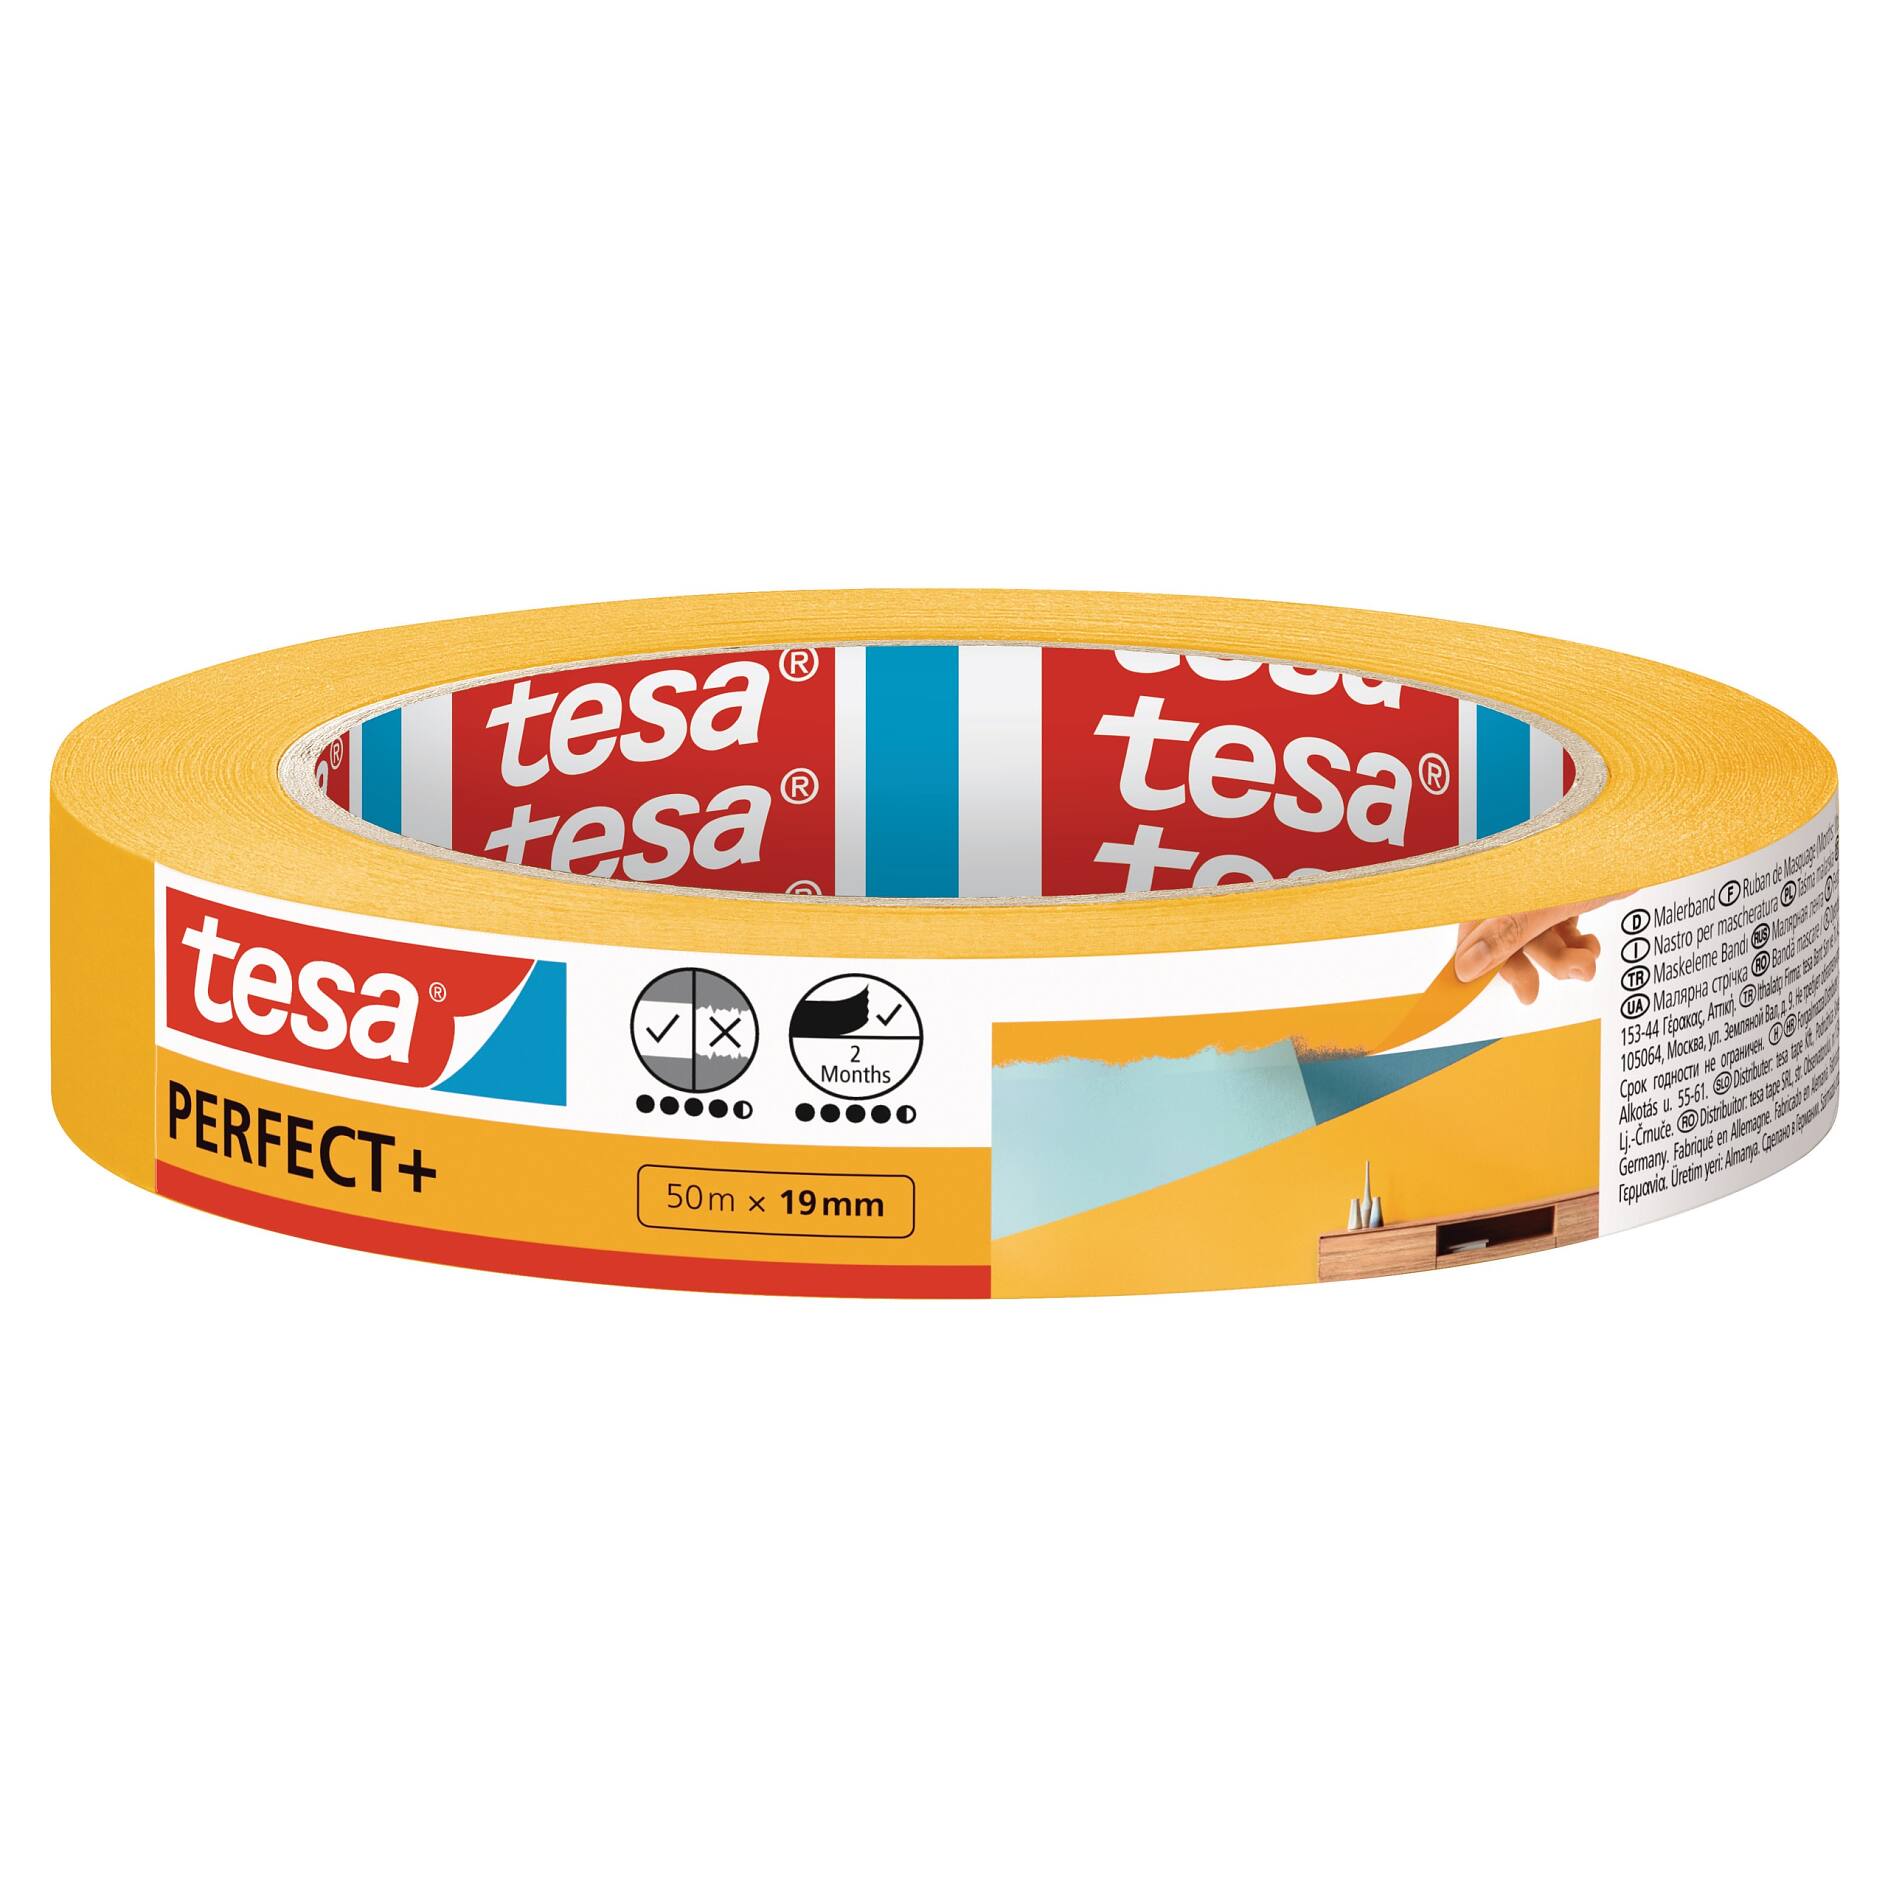 tesa Masking Tape Economy EcoLogo - Painters Tape, 4 Days Residue-Free  Removal, Without Solvent - Narrow, 2X 50m x 30 mm + 1x 50m x 19mm